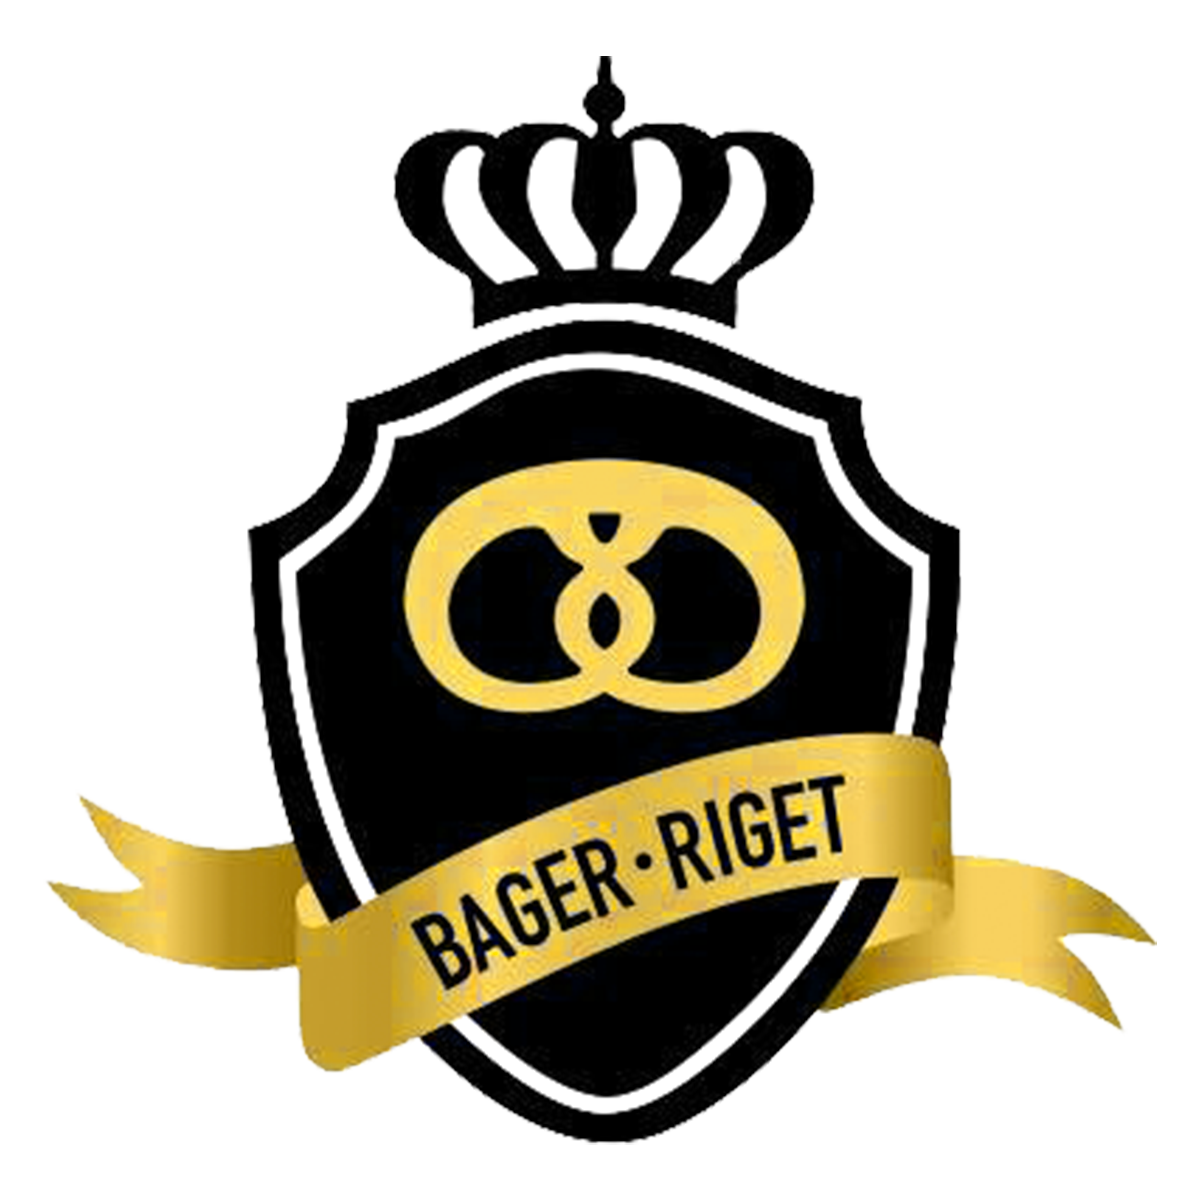 Bager-Riget